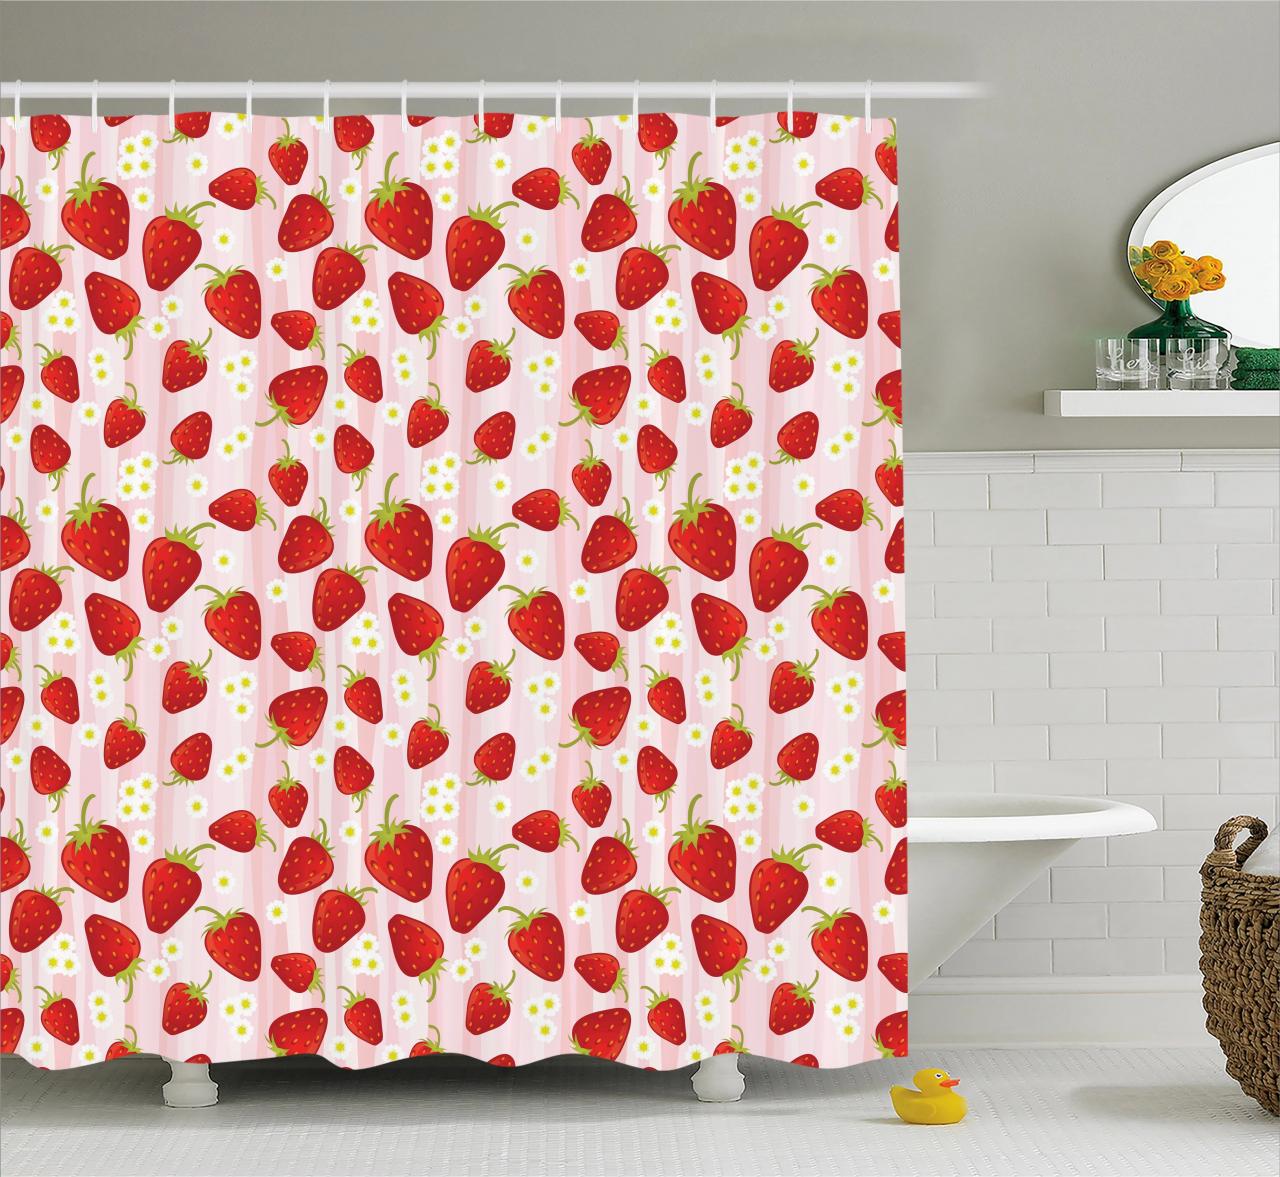 Strawberry Shower Curtain, Delicious Summer Fruit Snacks and Daisy